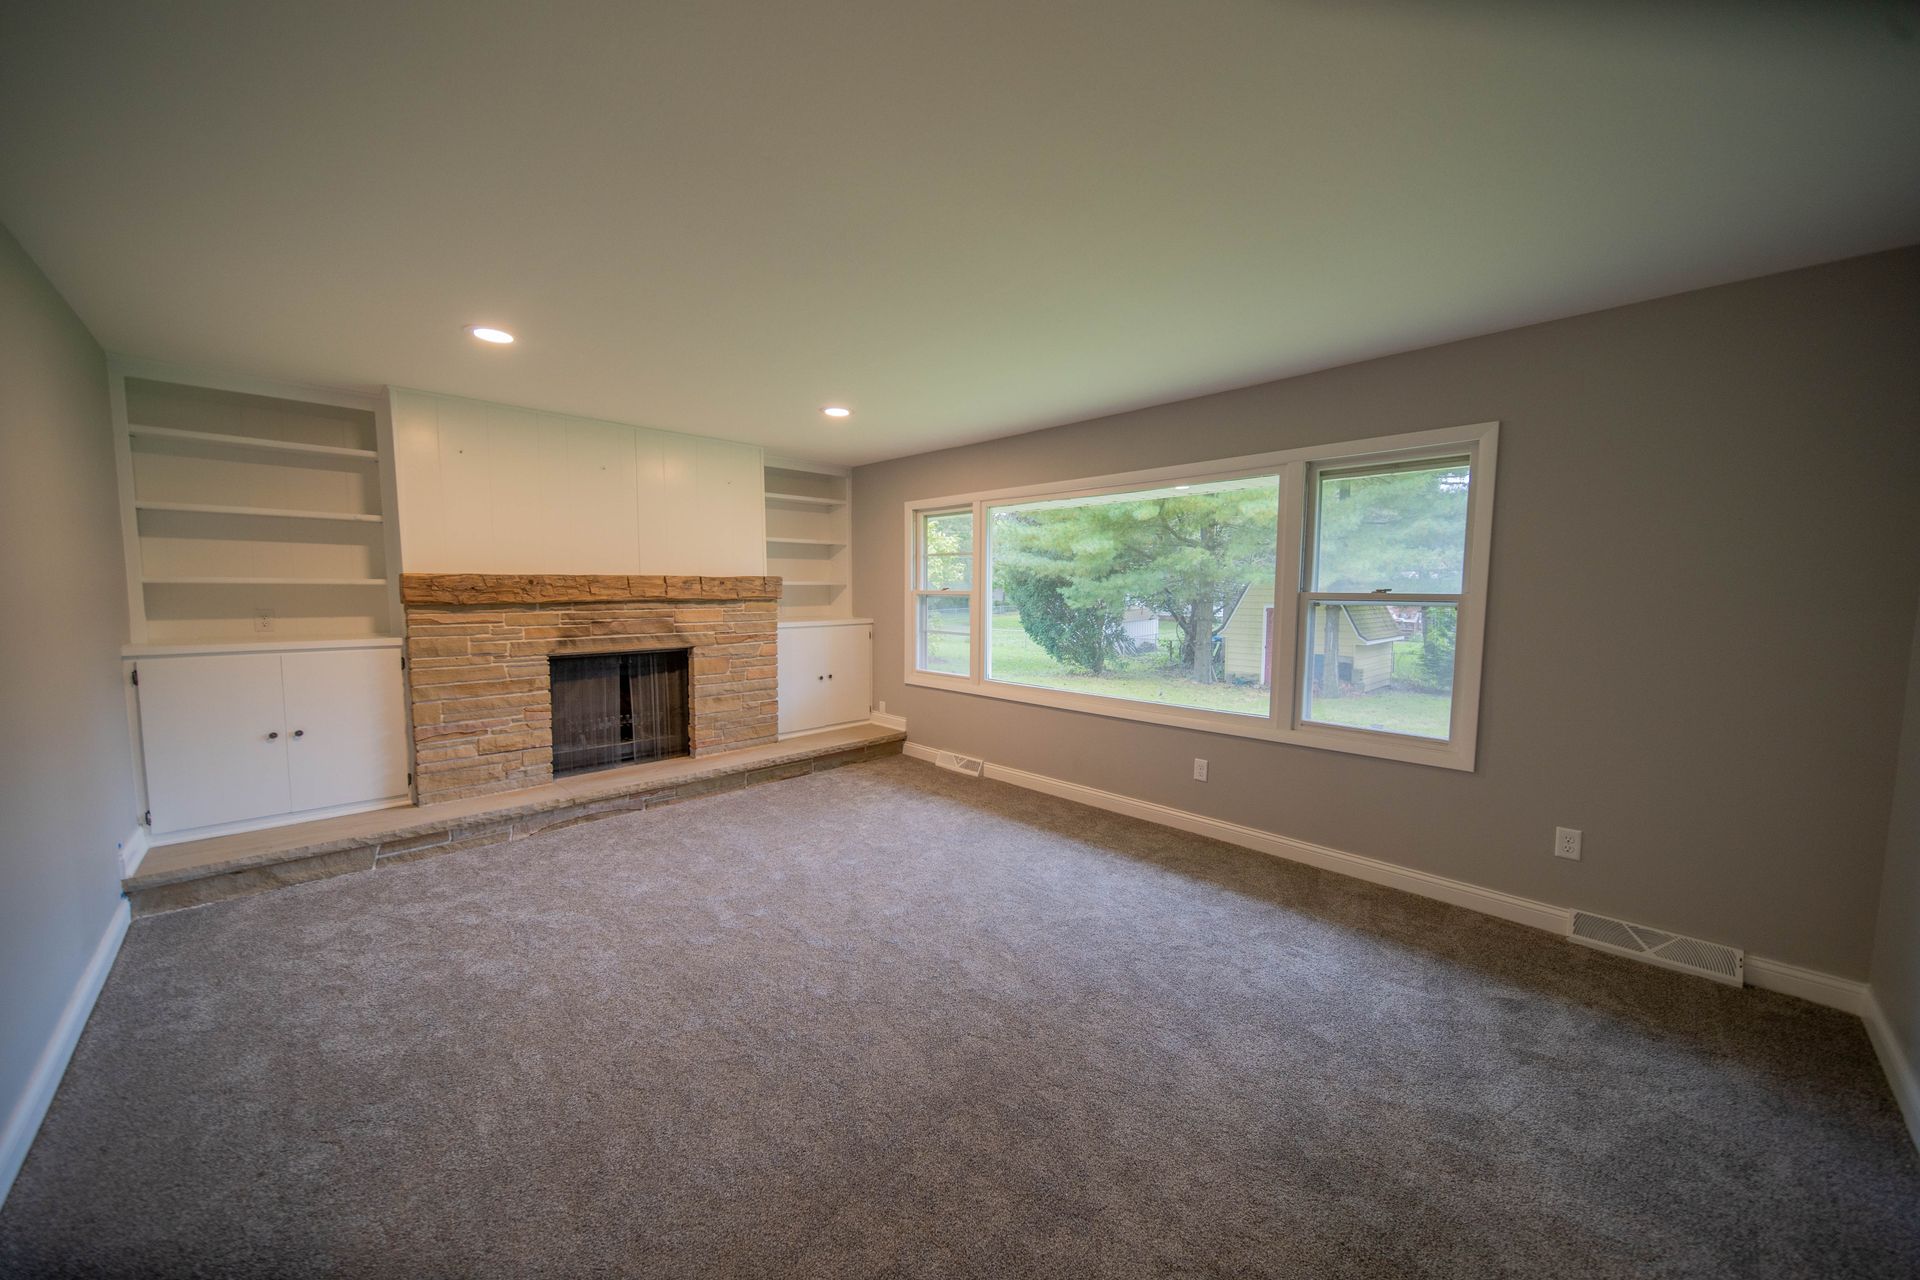 An empty living room with a fireplace and large windows.